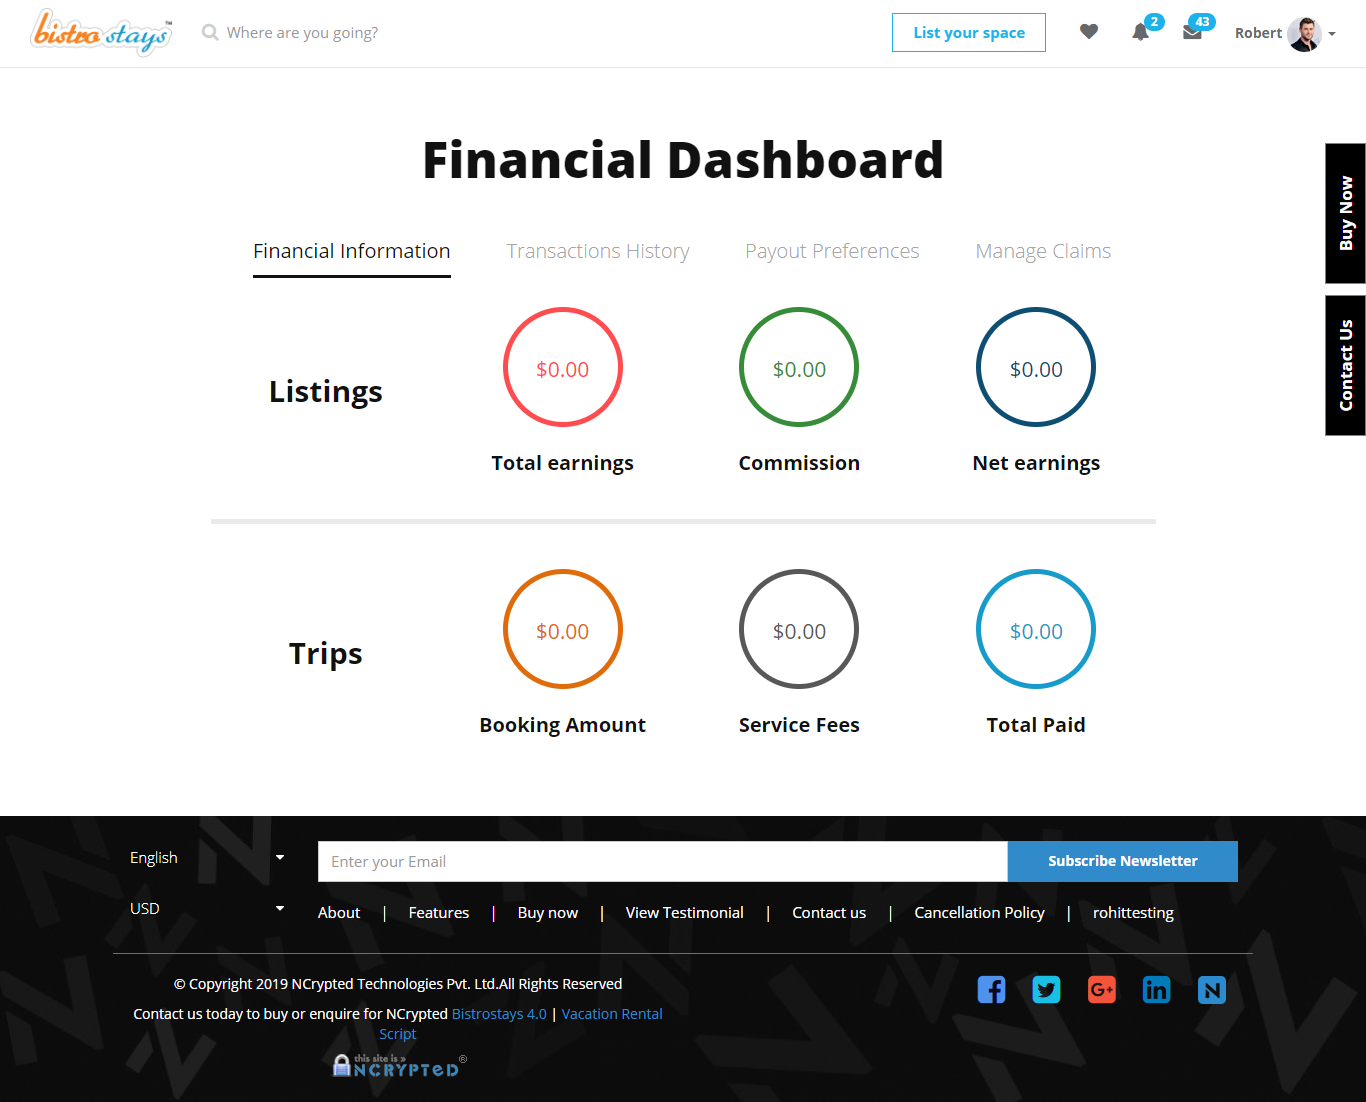 Interactive Host and Guest dashboards